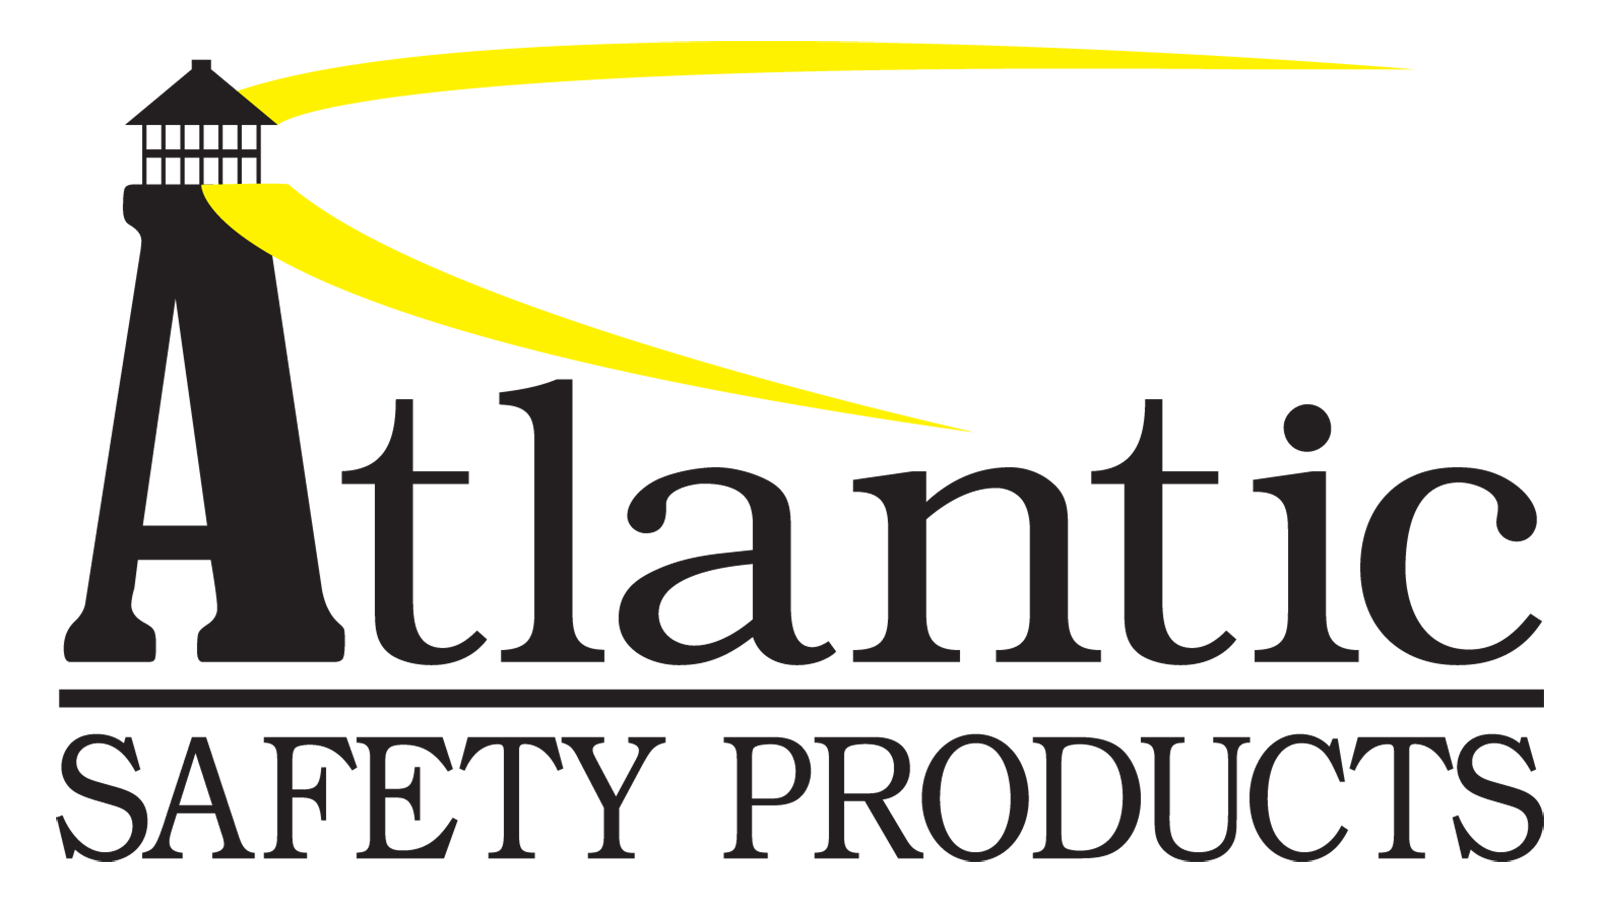 Atlantic Safety Products